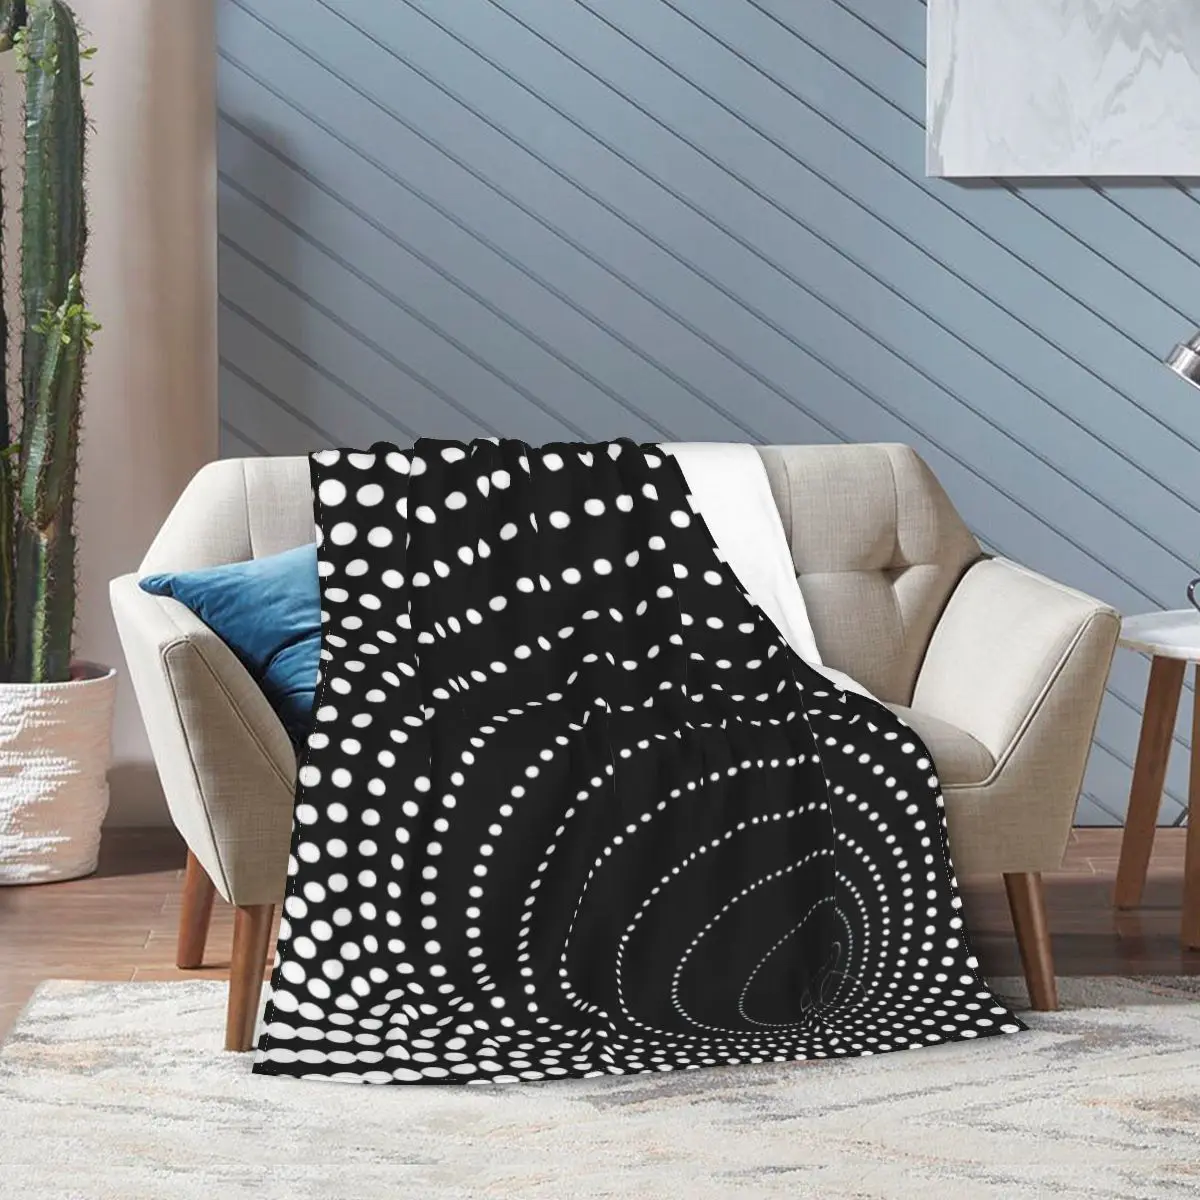 

Optical Illusion Flannel Fleece Blanket For Kids Teens Adults Soft Cozy Warm Fuzzy